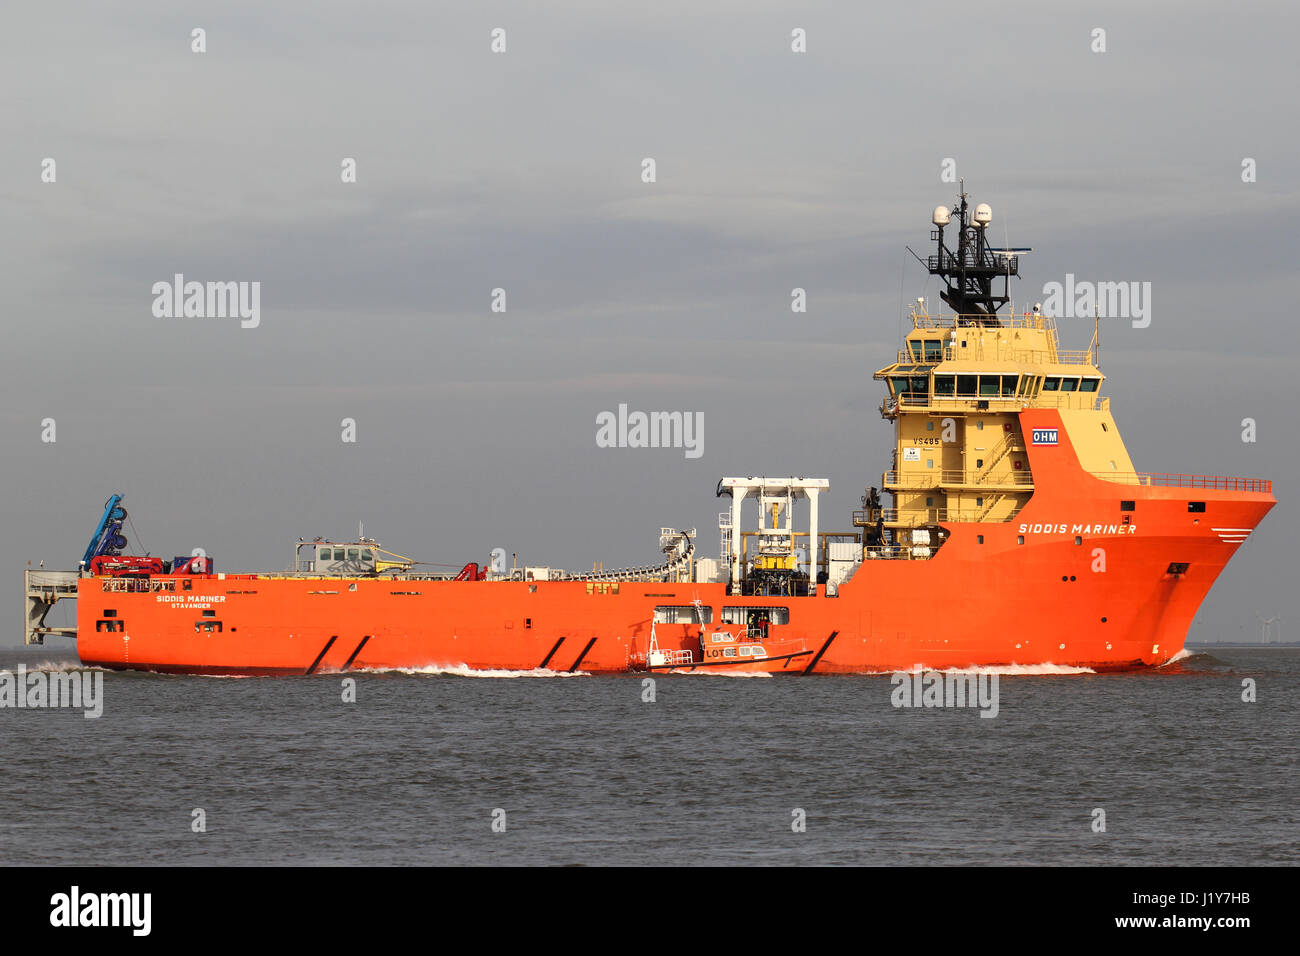 SIDDIS MARINER on the river Elbe. The SIDDIS MARINER is a diesel electric driven supply vessel and pipe carrier, owned and operated by Siem Offshore. Stock Photo